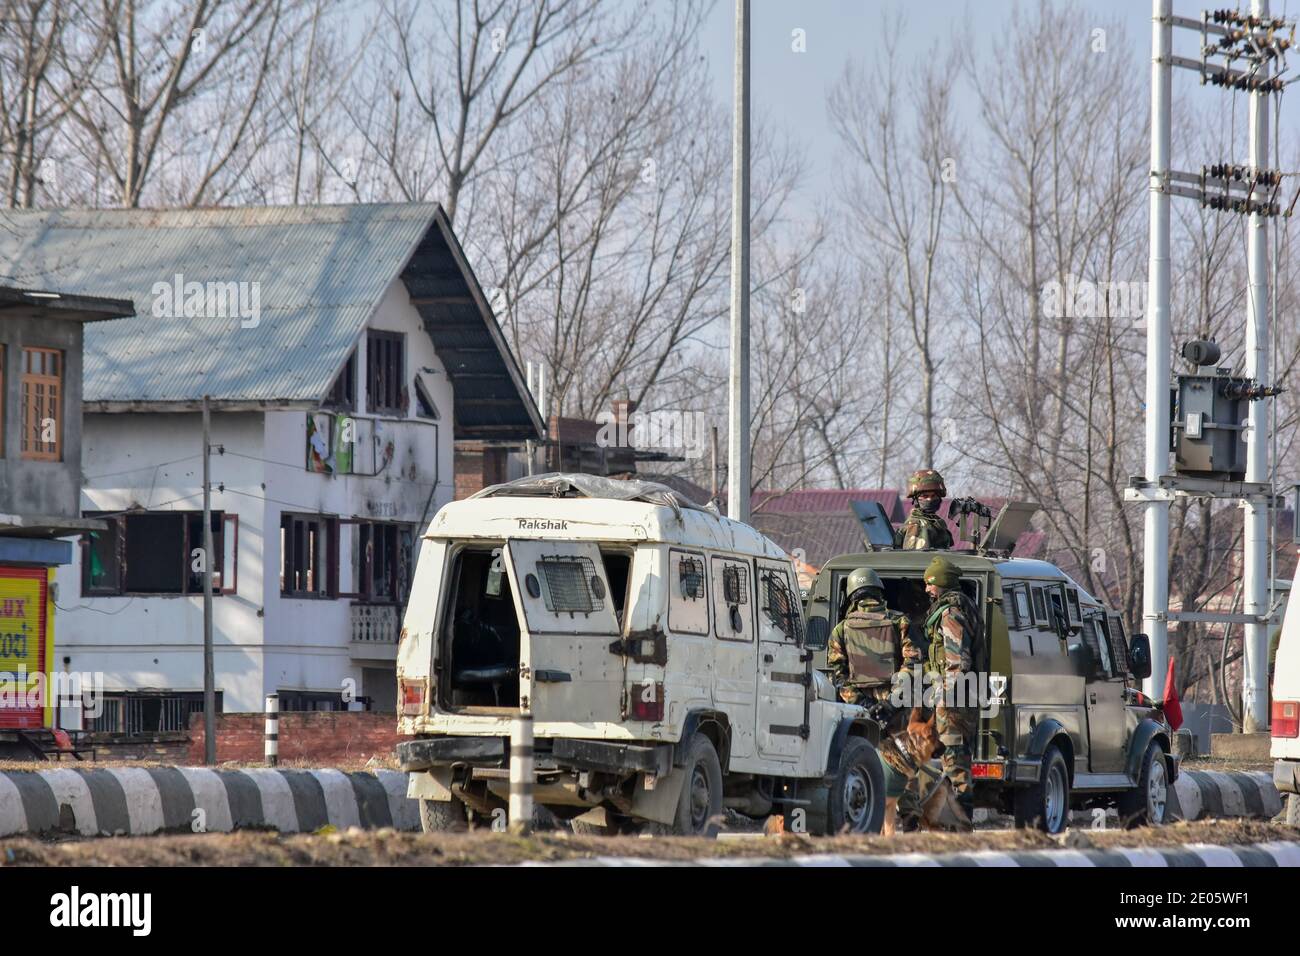 Indian army soldiers take position near the gun battle site on the outskirts of Srinagar.Three militants were killed in an overnight gun battle with government forces in Lawaypora area of Srinagar. The militants killed were planning a big strike on the Srinagar-Muzaffarabad highway, an official said. Stock Photo